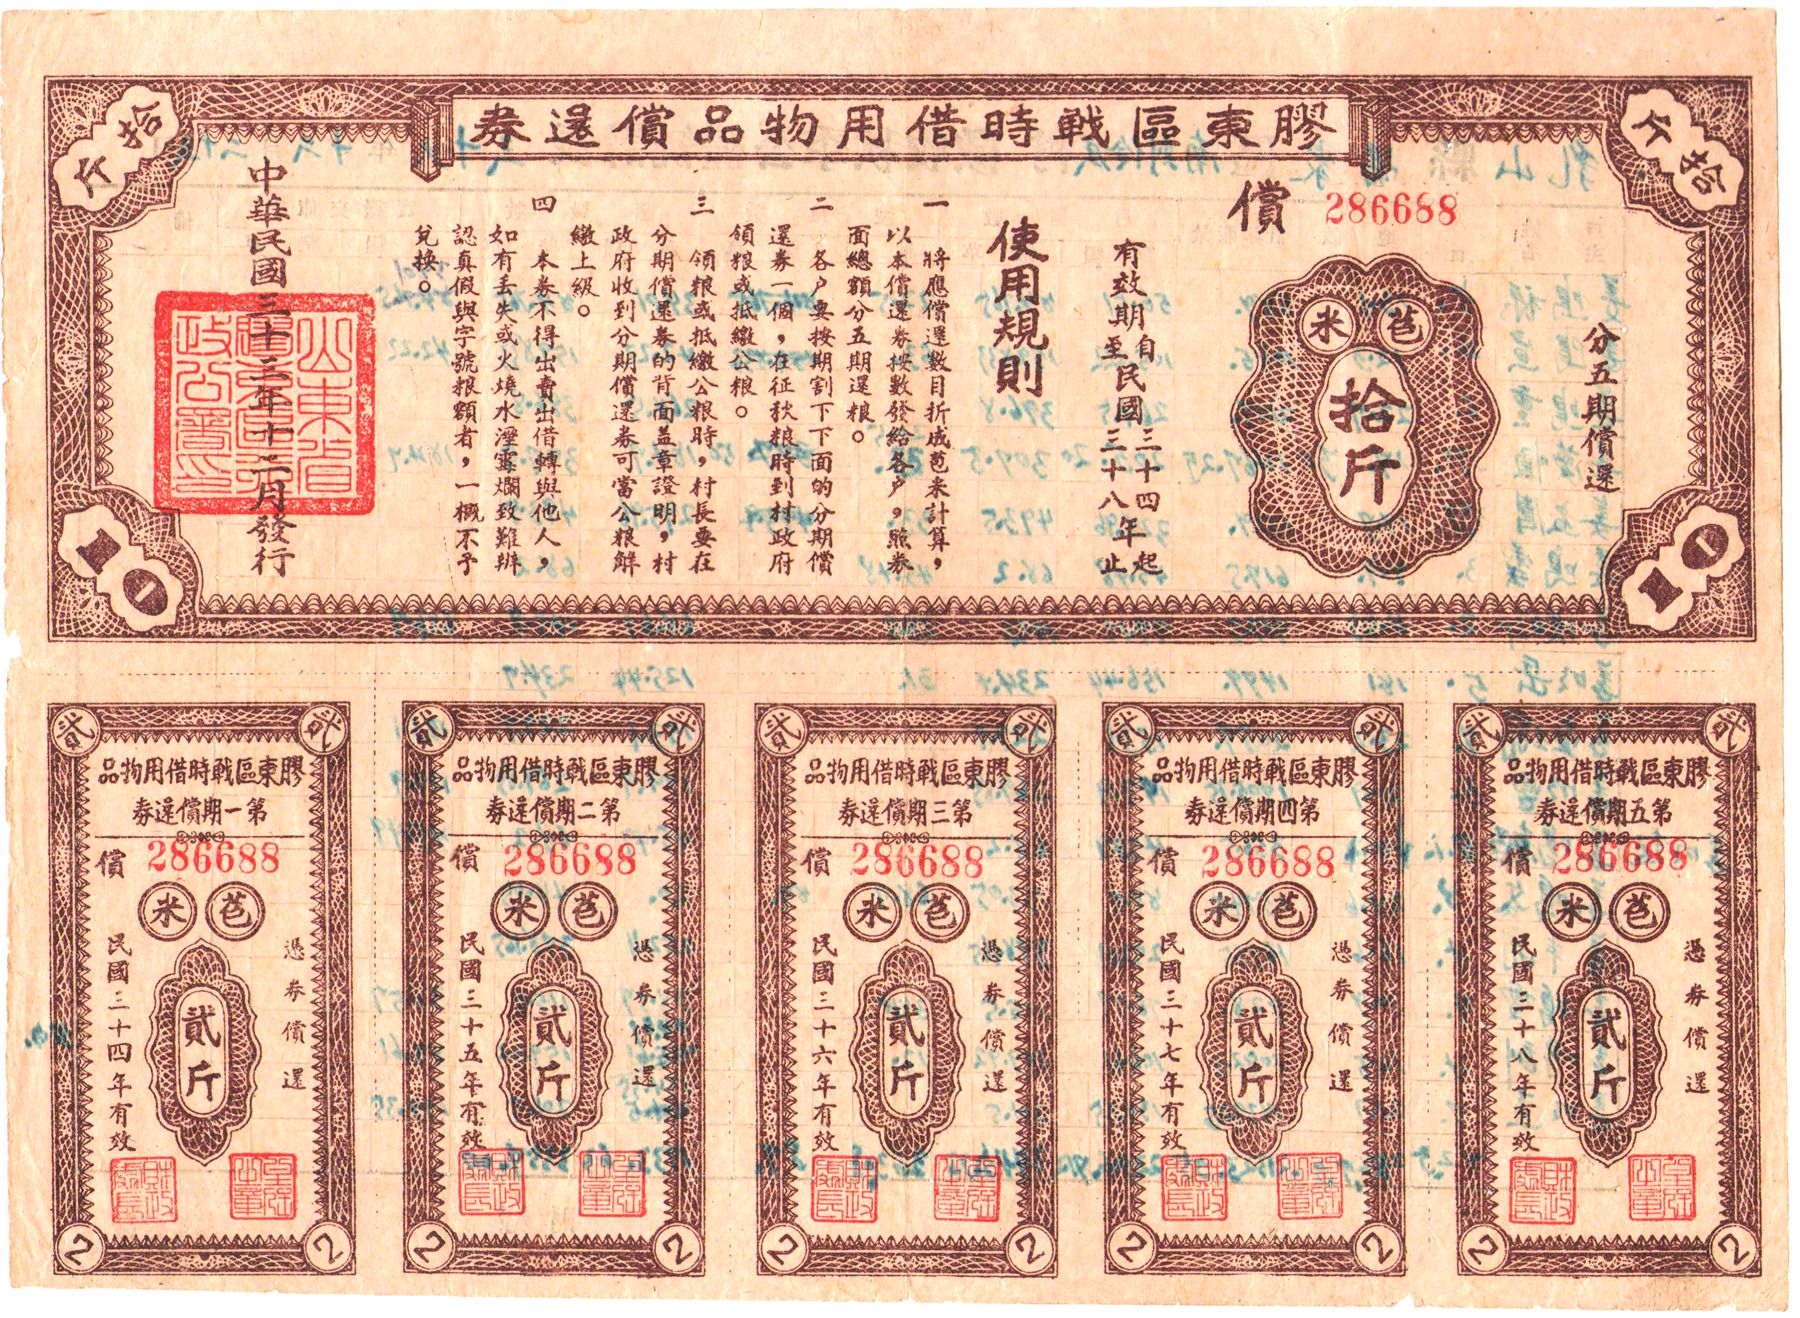 B4080, Bond 5% of Communist Government of Shandong Province, 5 Kg Rice, 1944 Brown